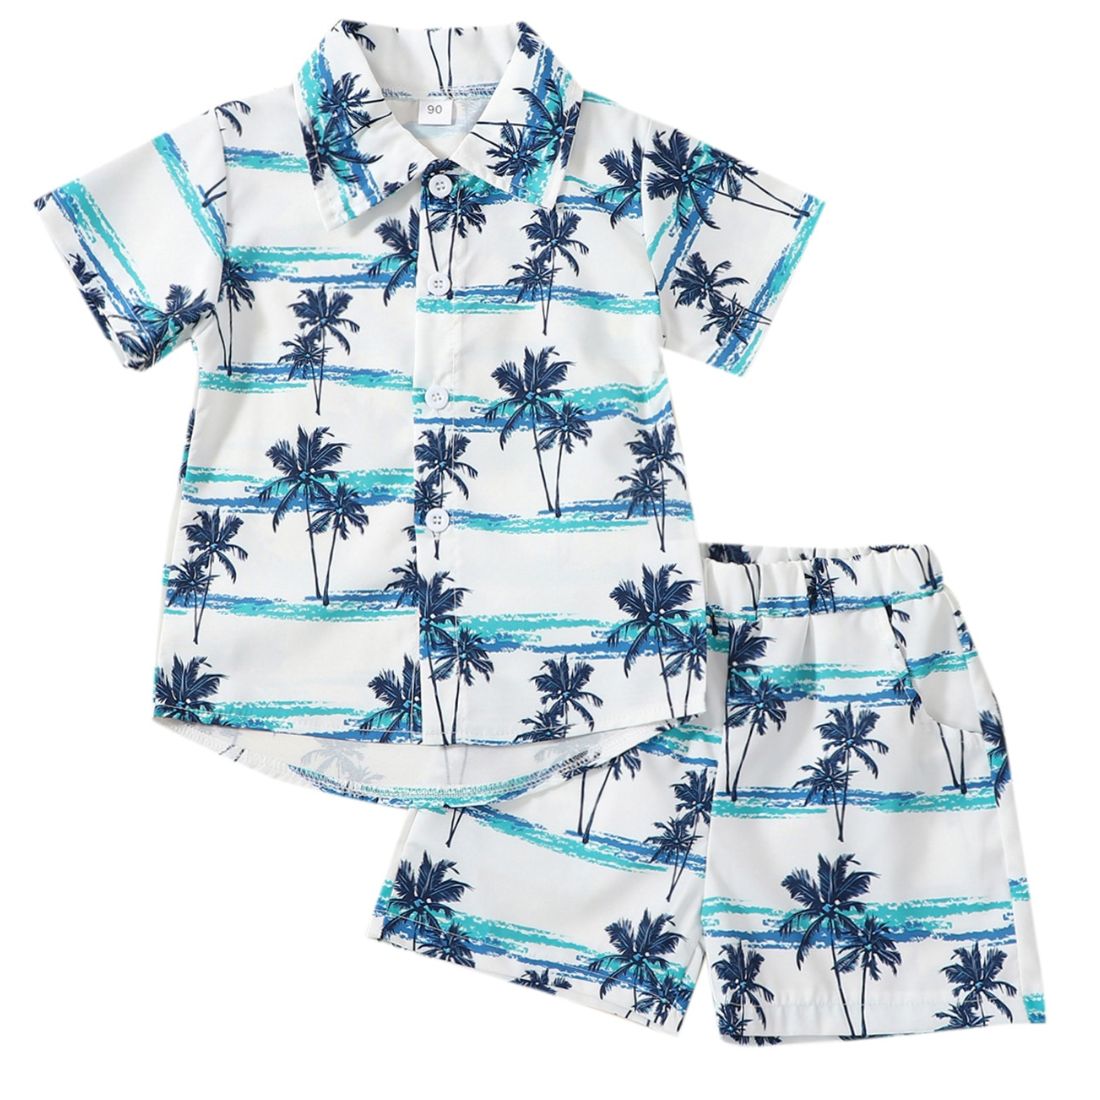 Boys Palm Island Casual Set 2-Piece Clothing Set -Buy on-trend and stylish Baby and Toddler Clothing Sets @ My Trendy Youngsters - Dress your little man in Style @ My Trendy Youngsters 